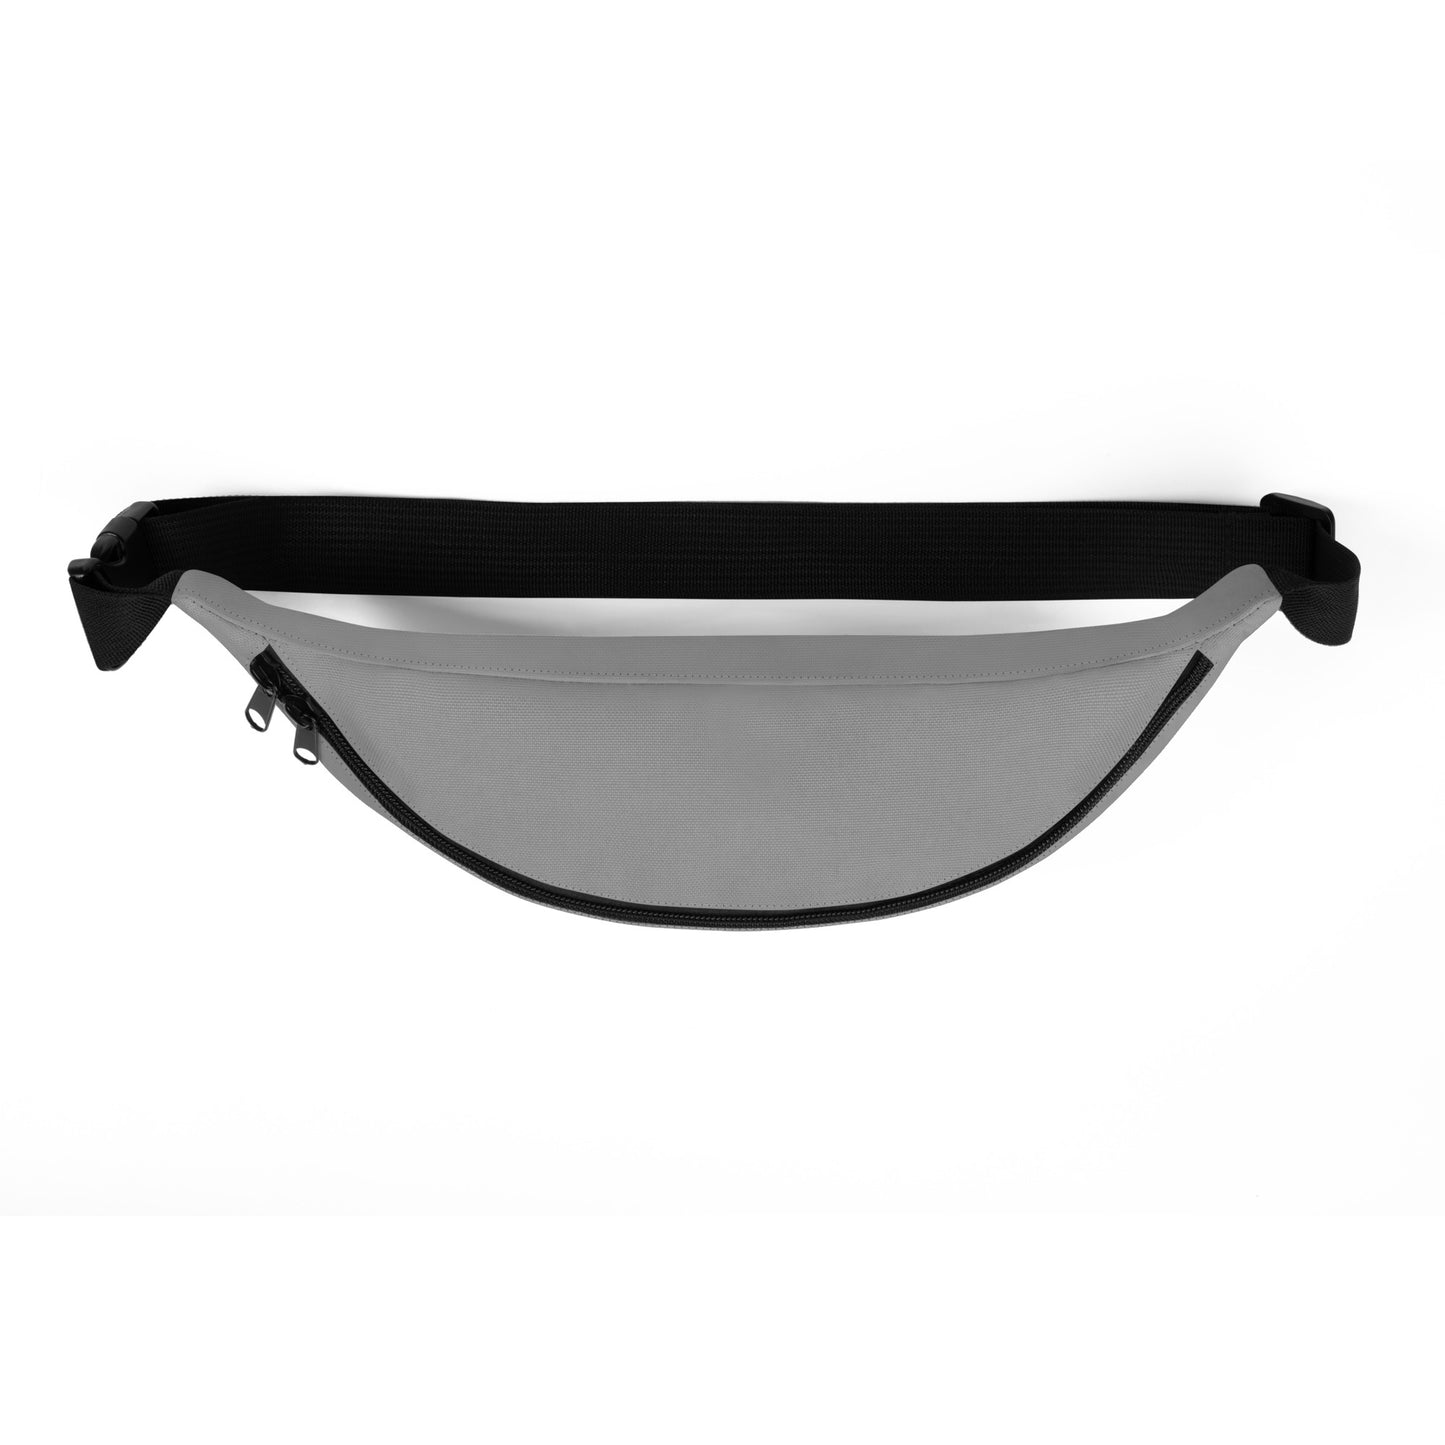 Pink Triangle Grey Fanny Pack